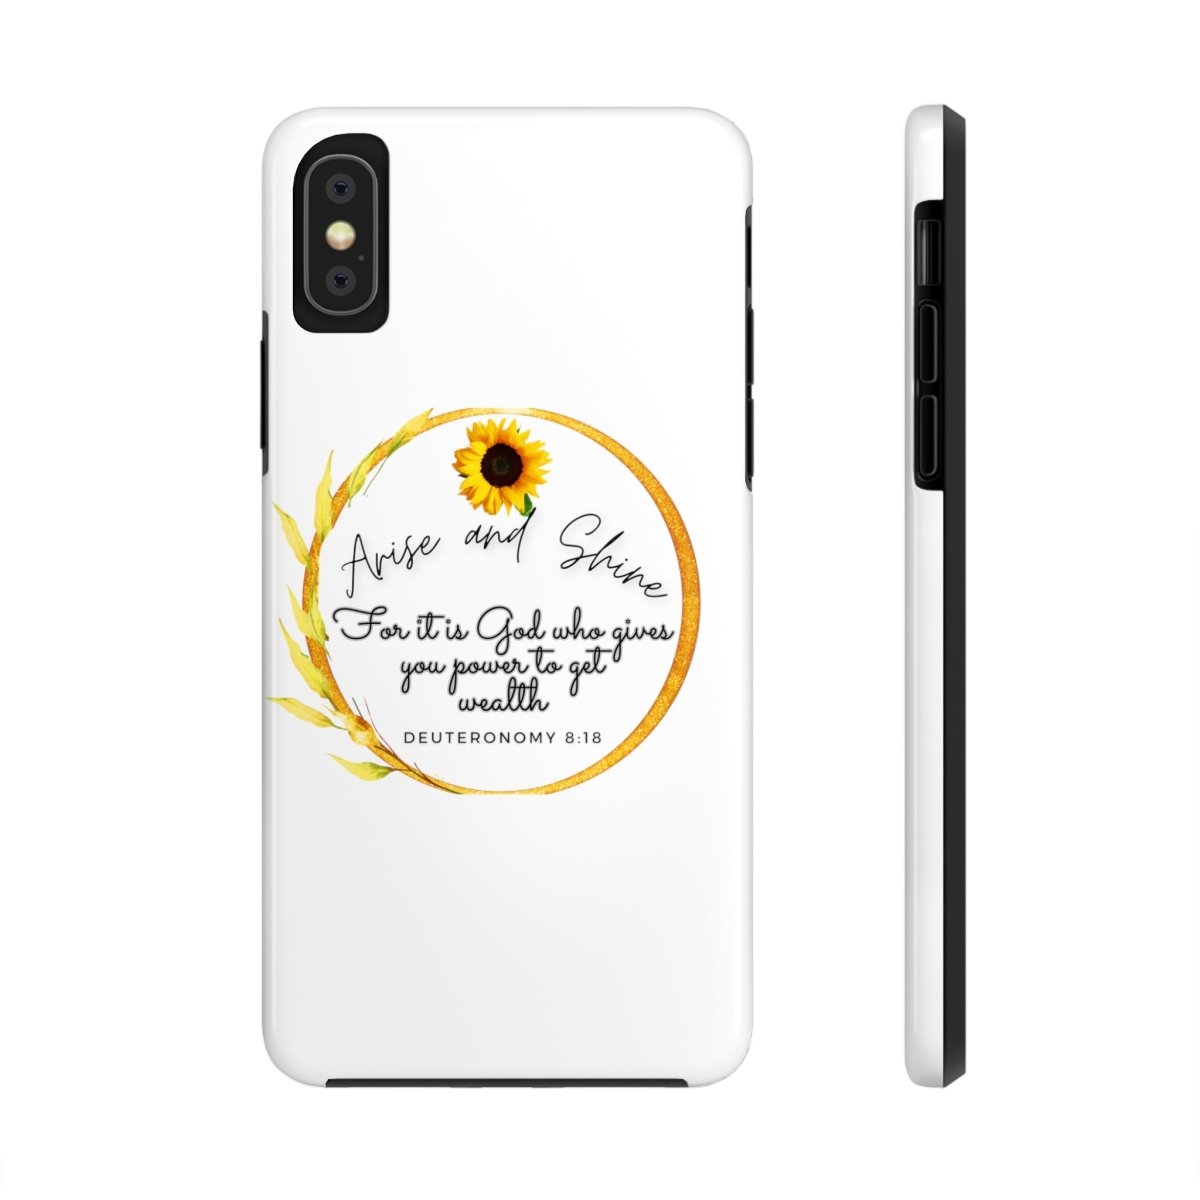 "Power to Get Wealth" Collection: Deuteronomy 8:18Tough Phone Cases - Plain Vision Brand